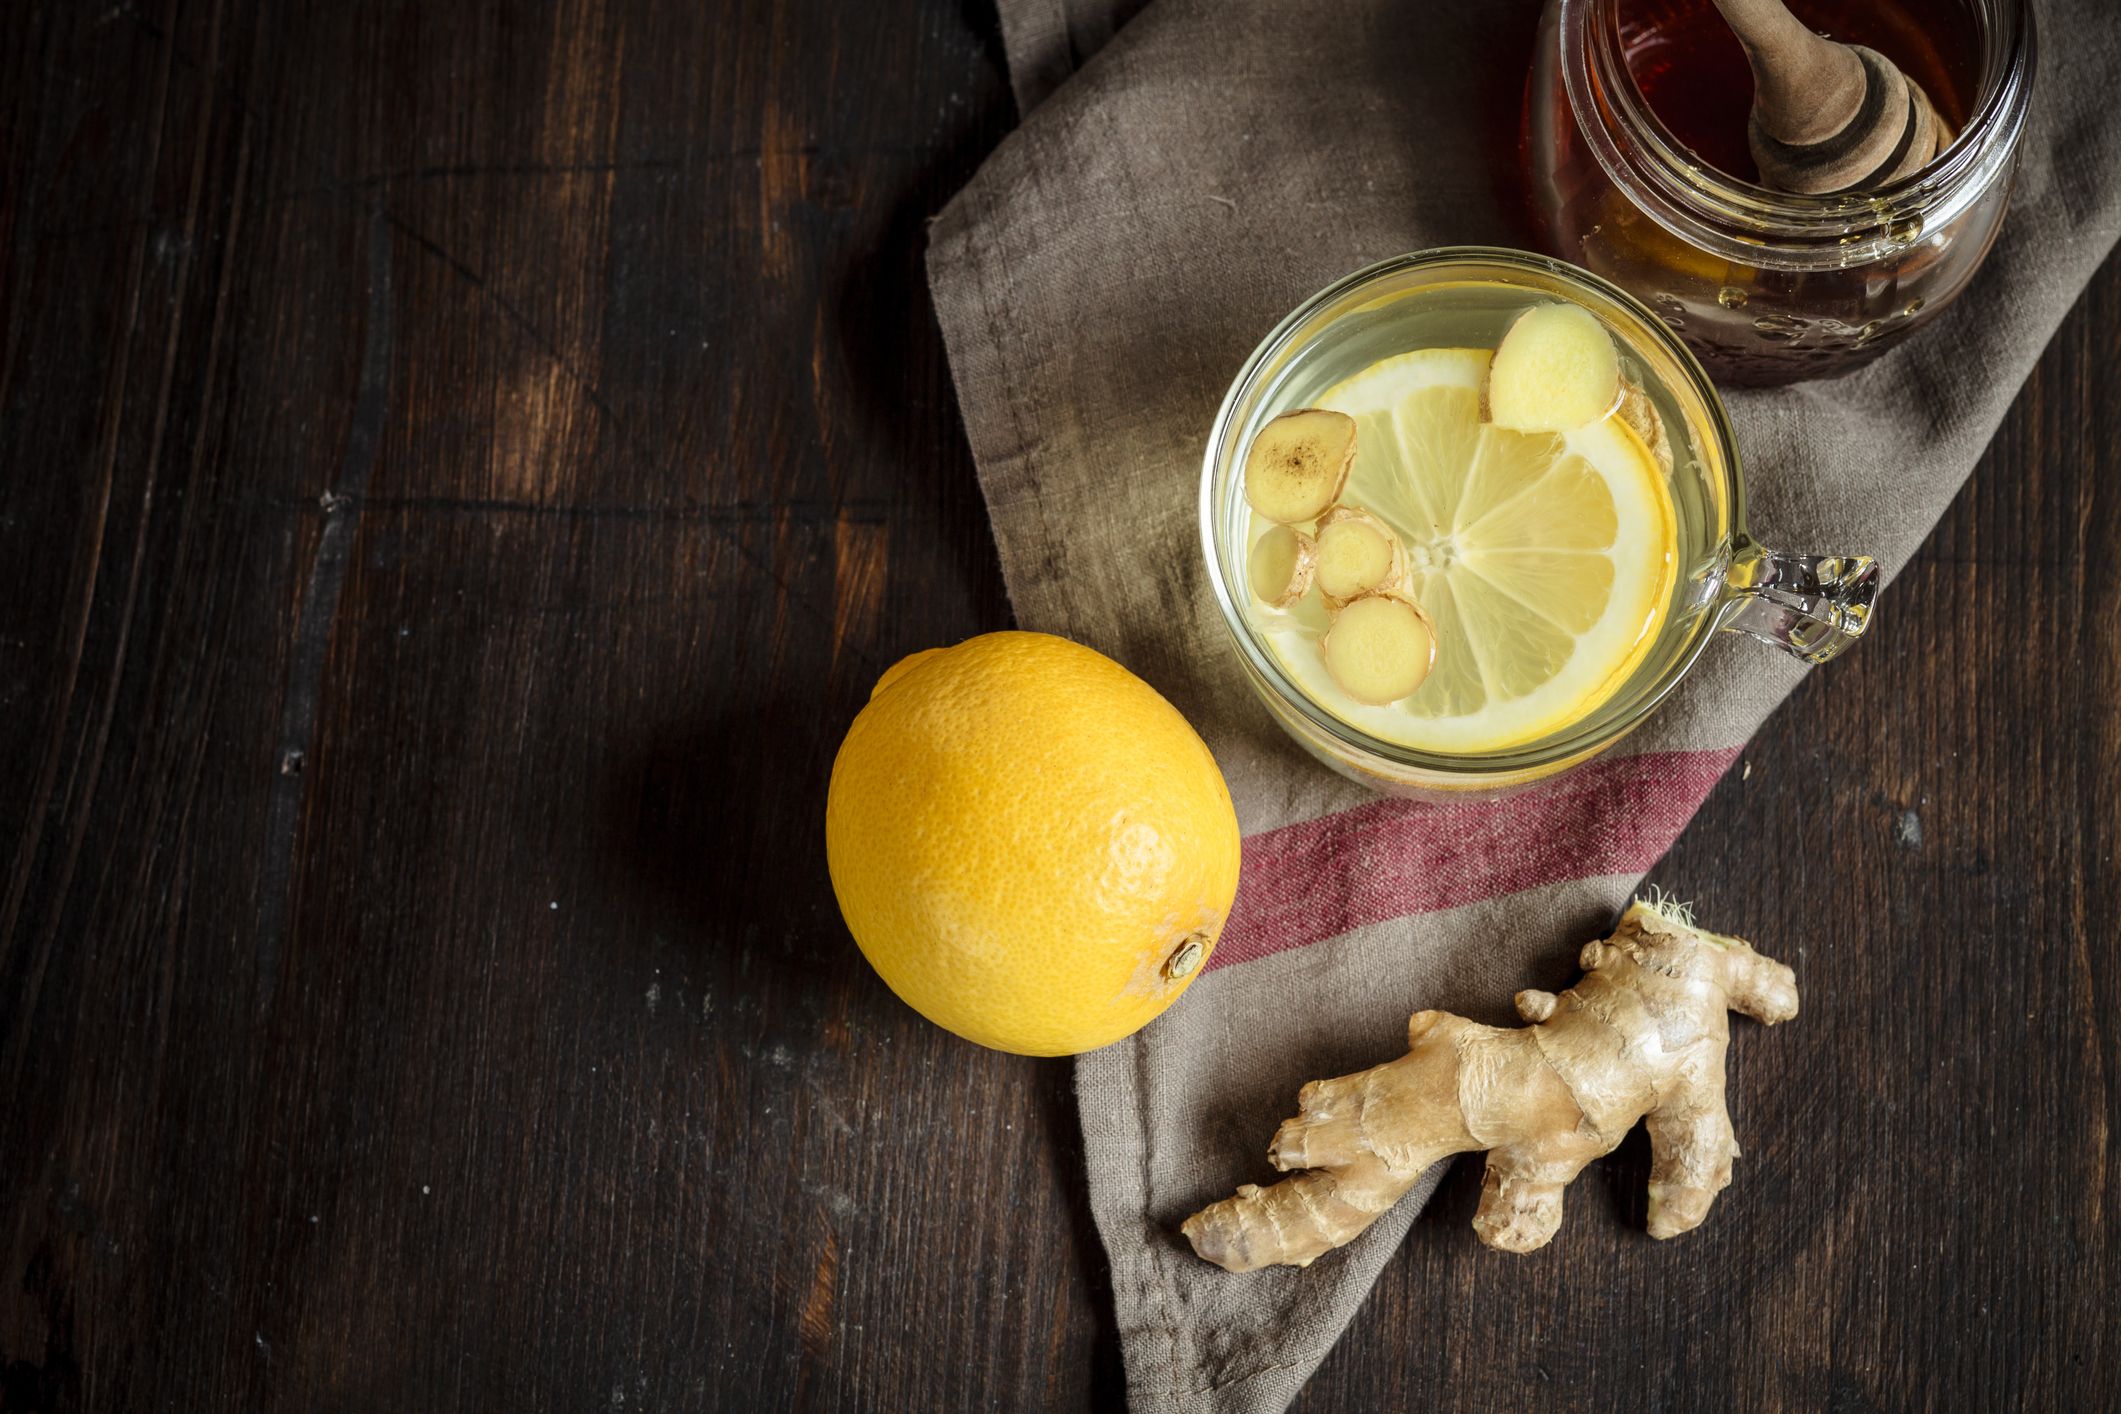 Eliminate Bloating With These Simple Yet Effective Home Remedies